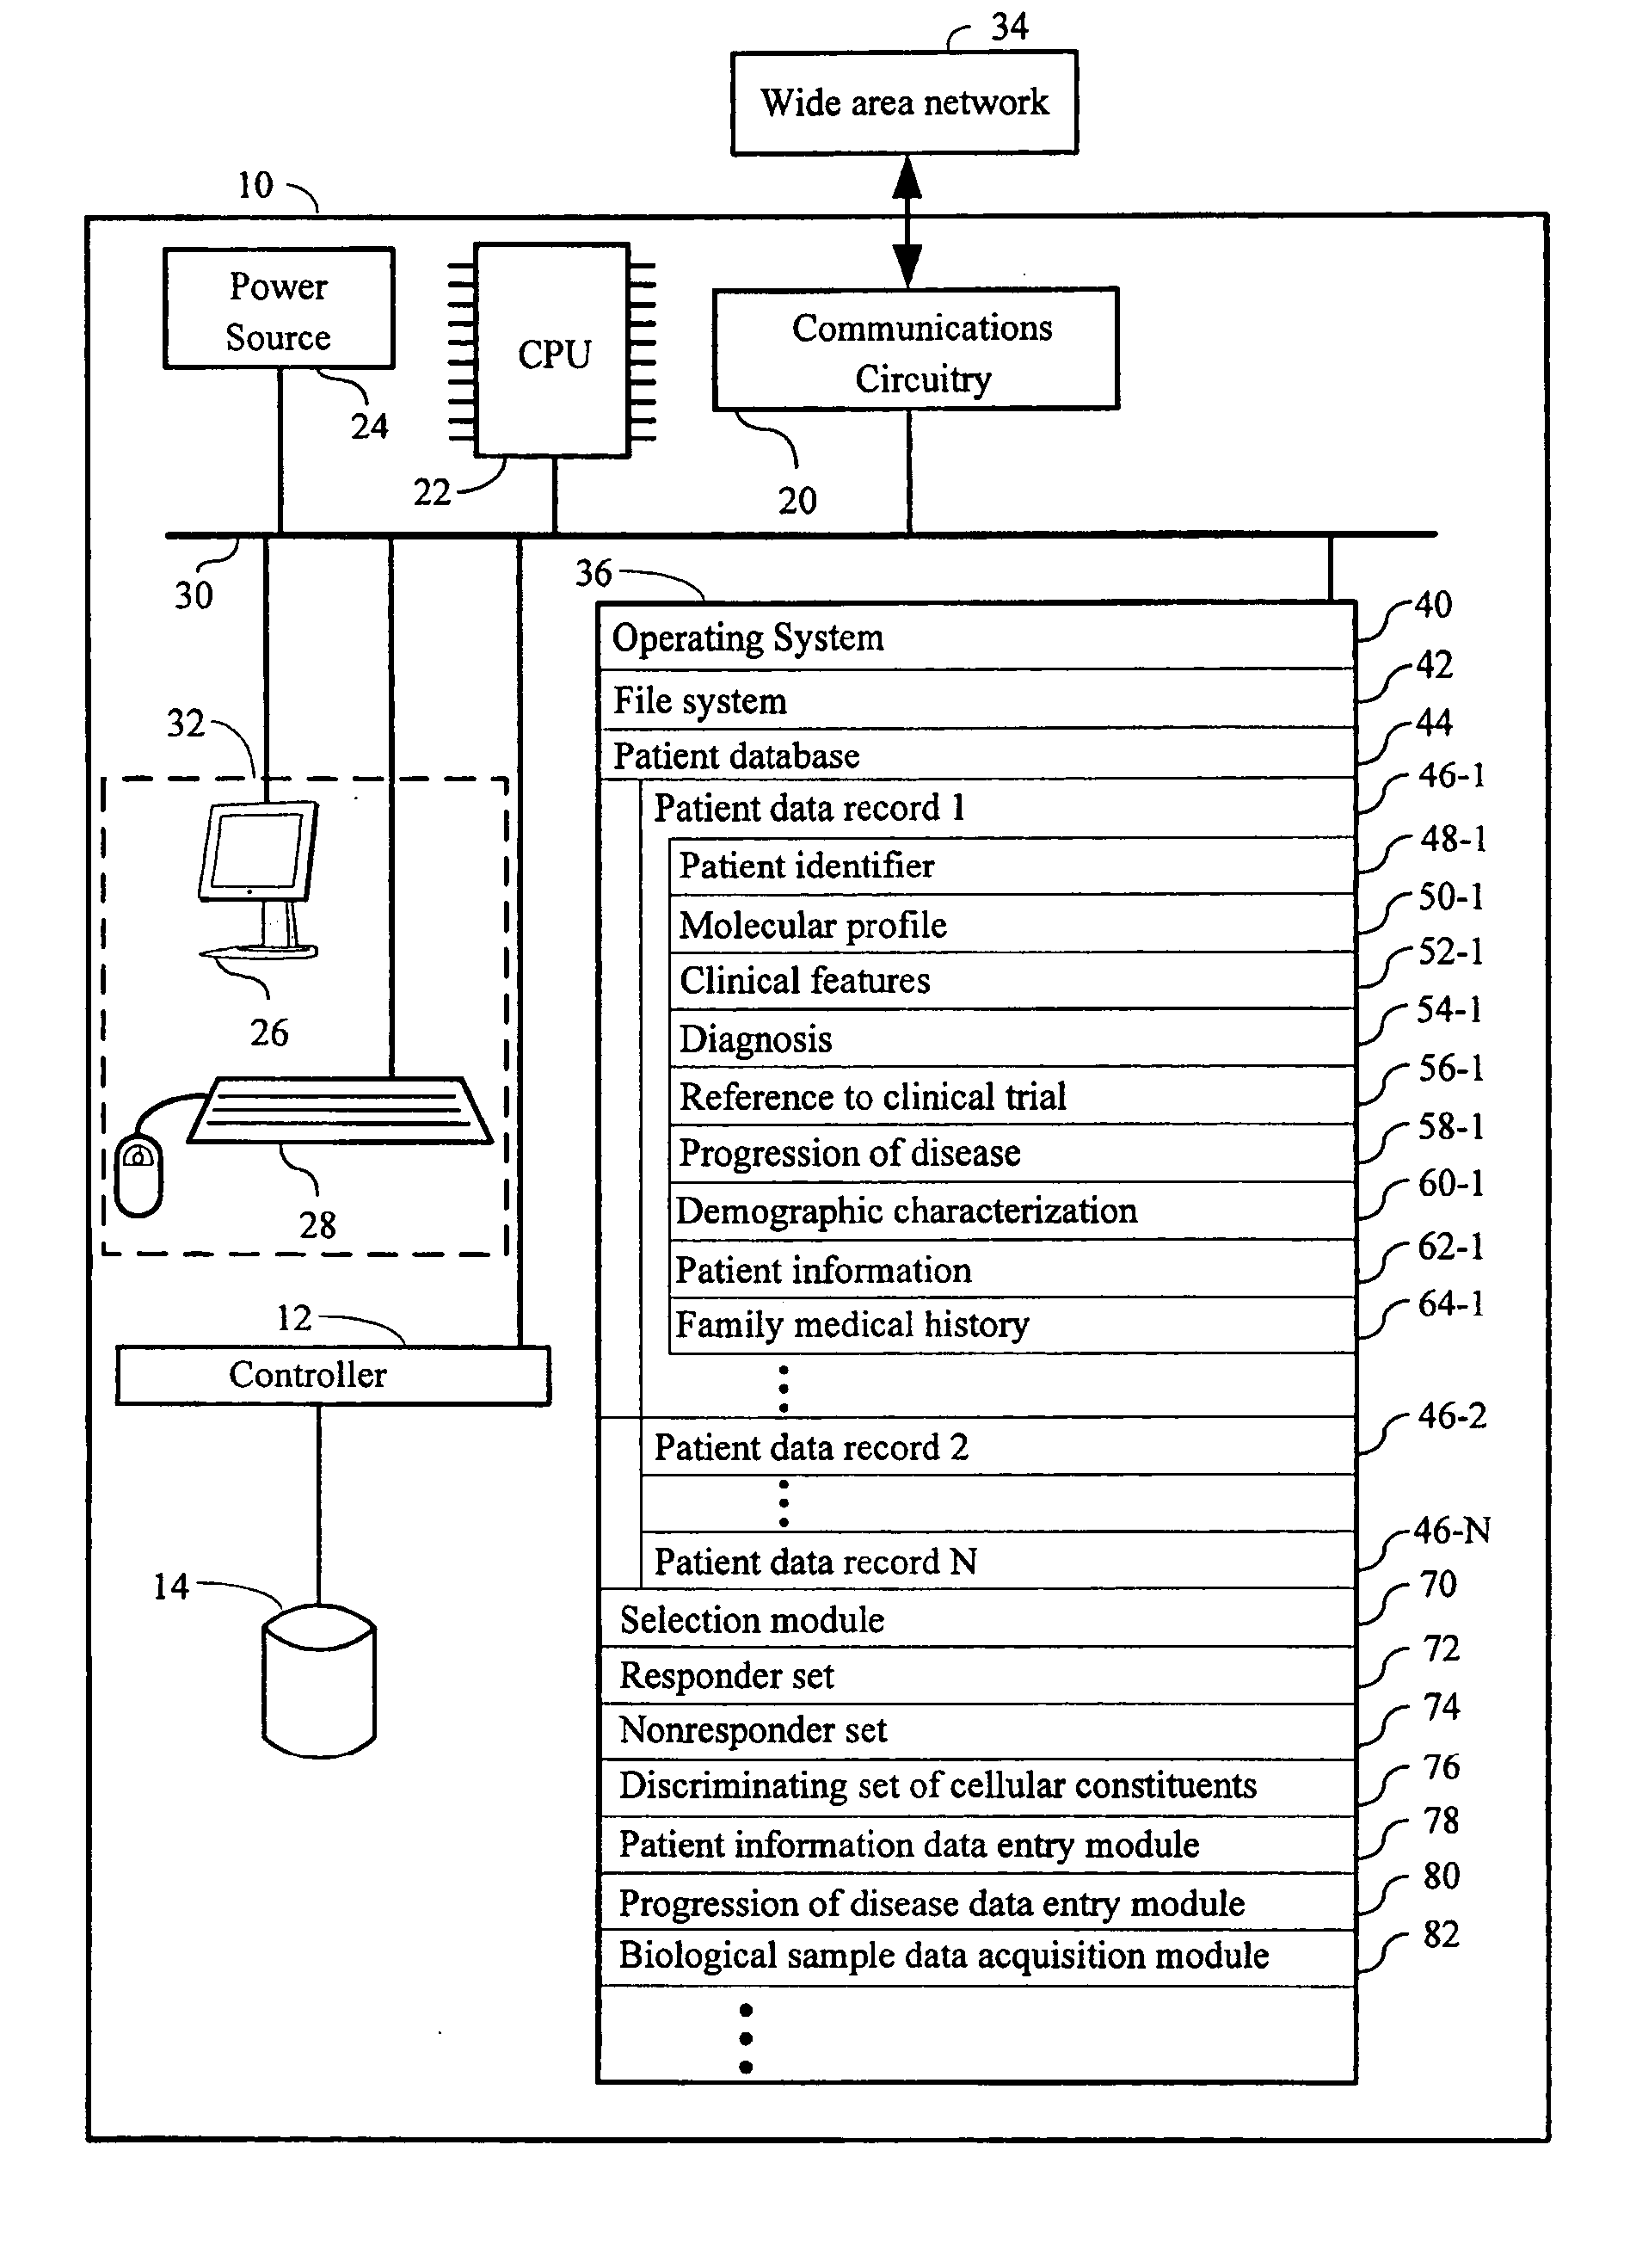 Computer systems and methods for selecting subjects for clinical trials